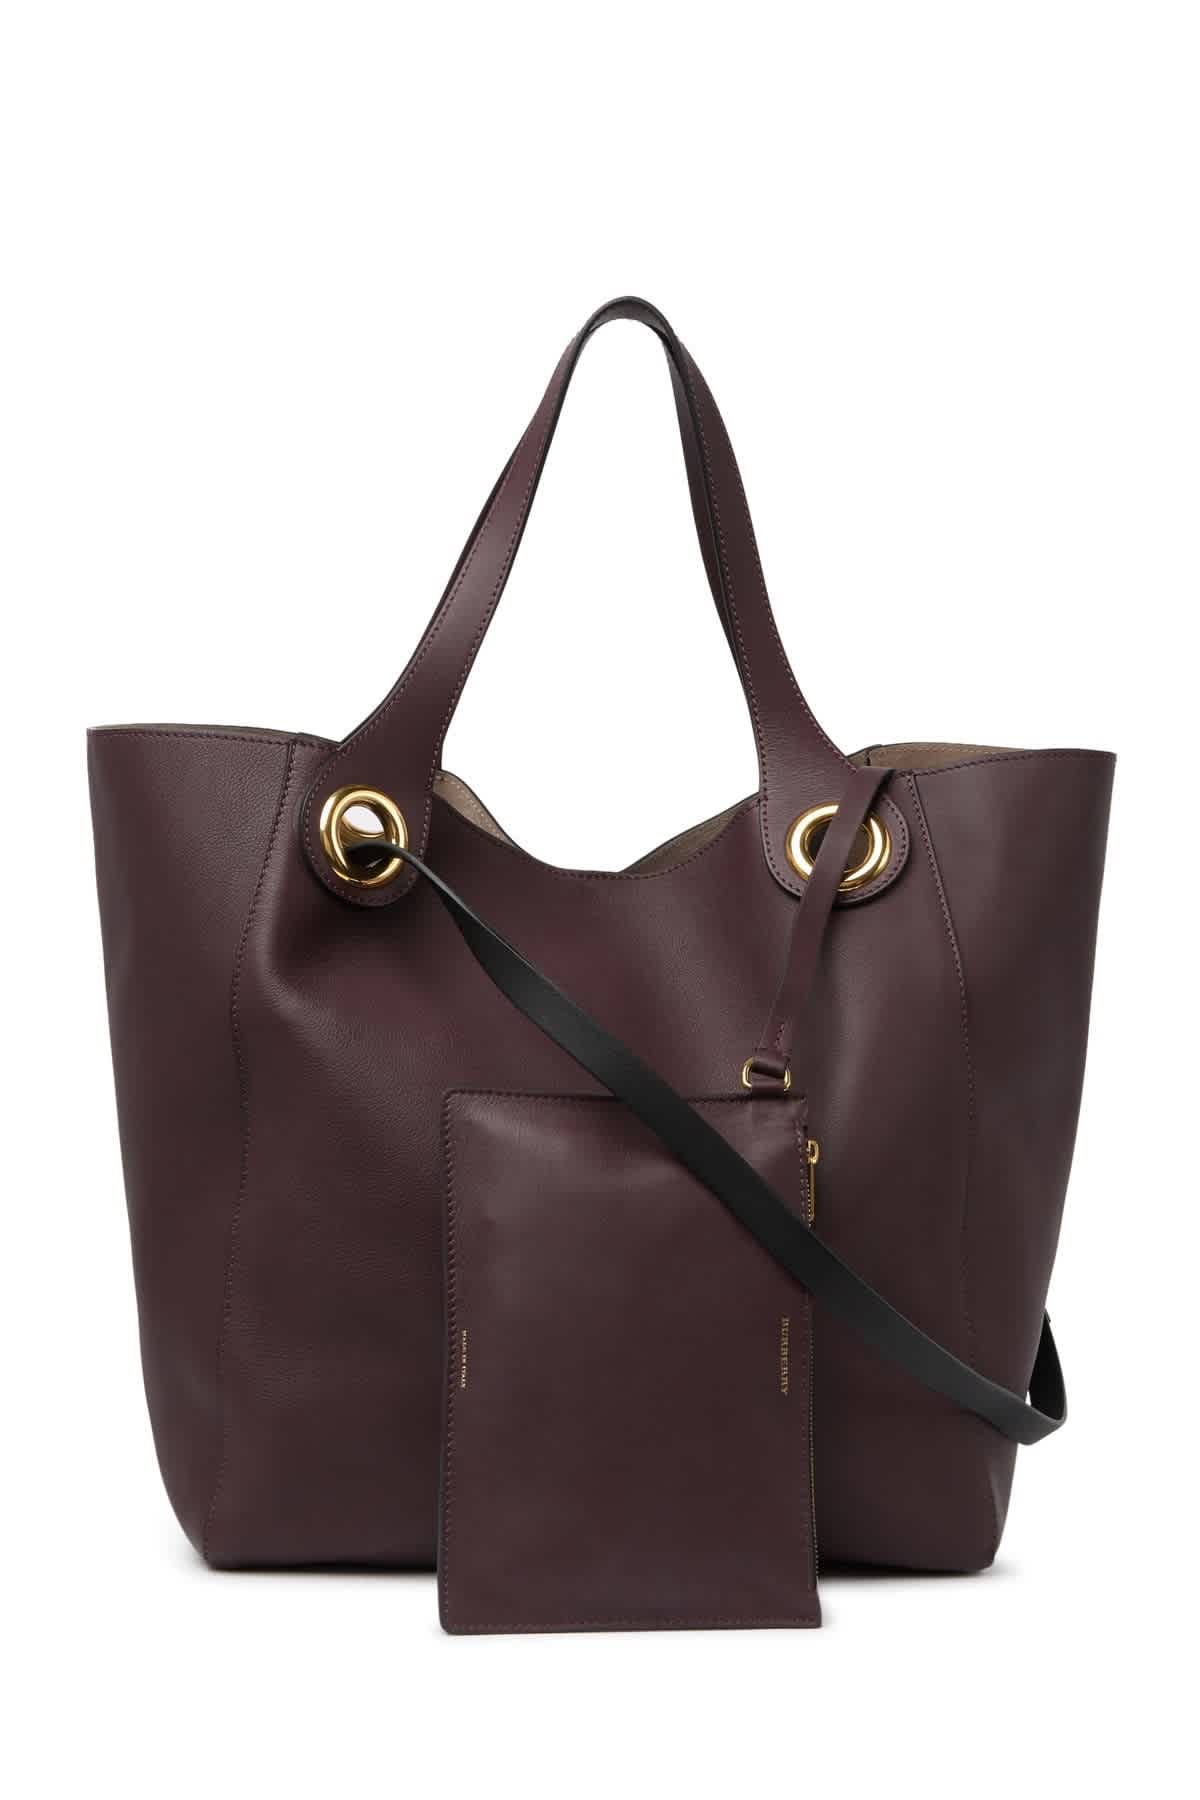 Burberry Deep Claret Large Grommet Leather Tote In Gold Tone